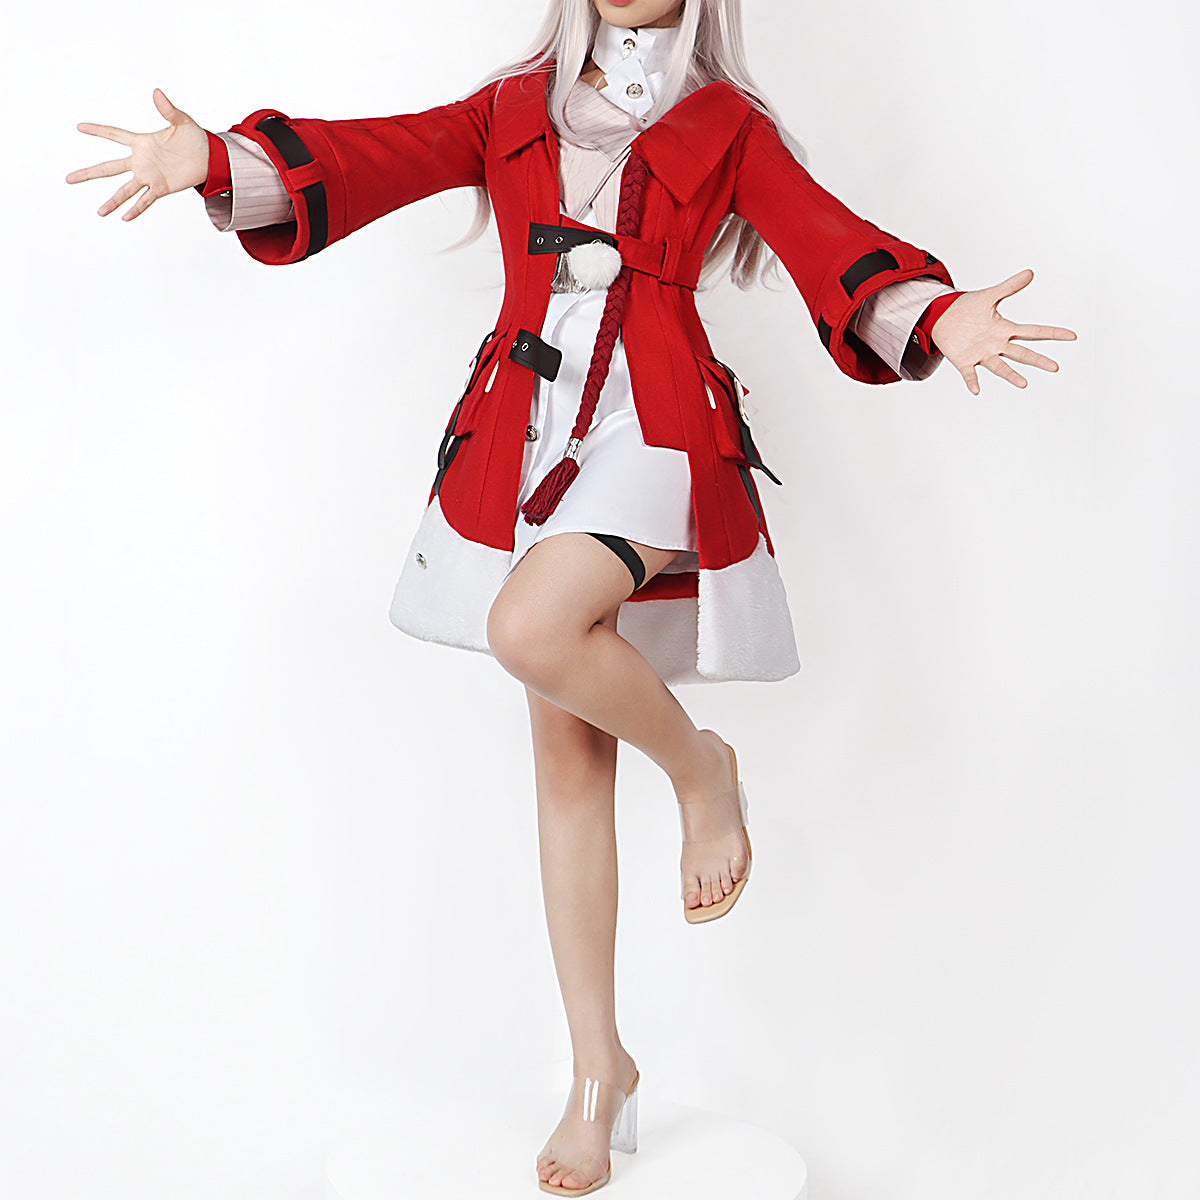 Rulercosplay Honkai Star Rail Clara Uniform Suit Cosplay Costume With Accessories For Halloween Party